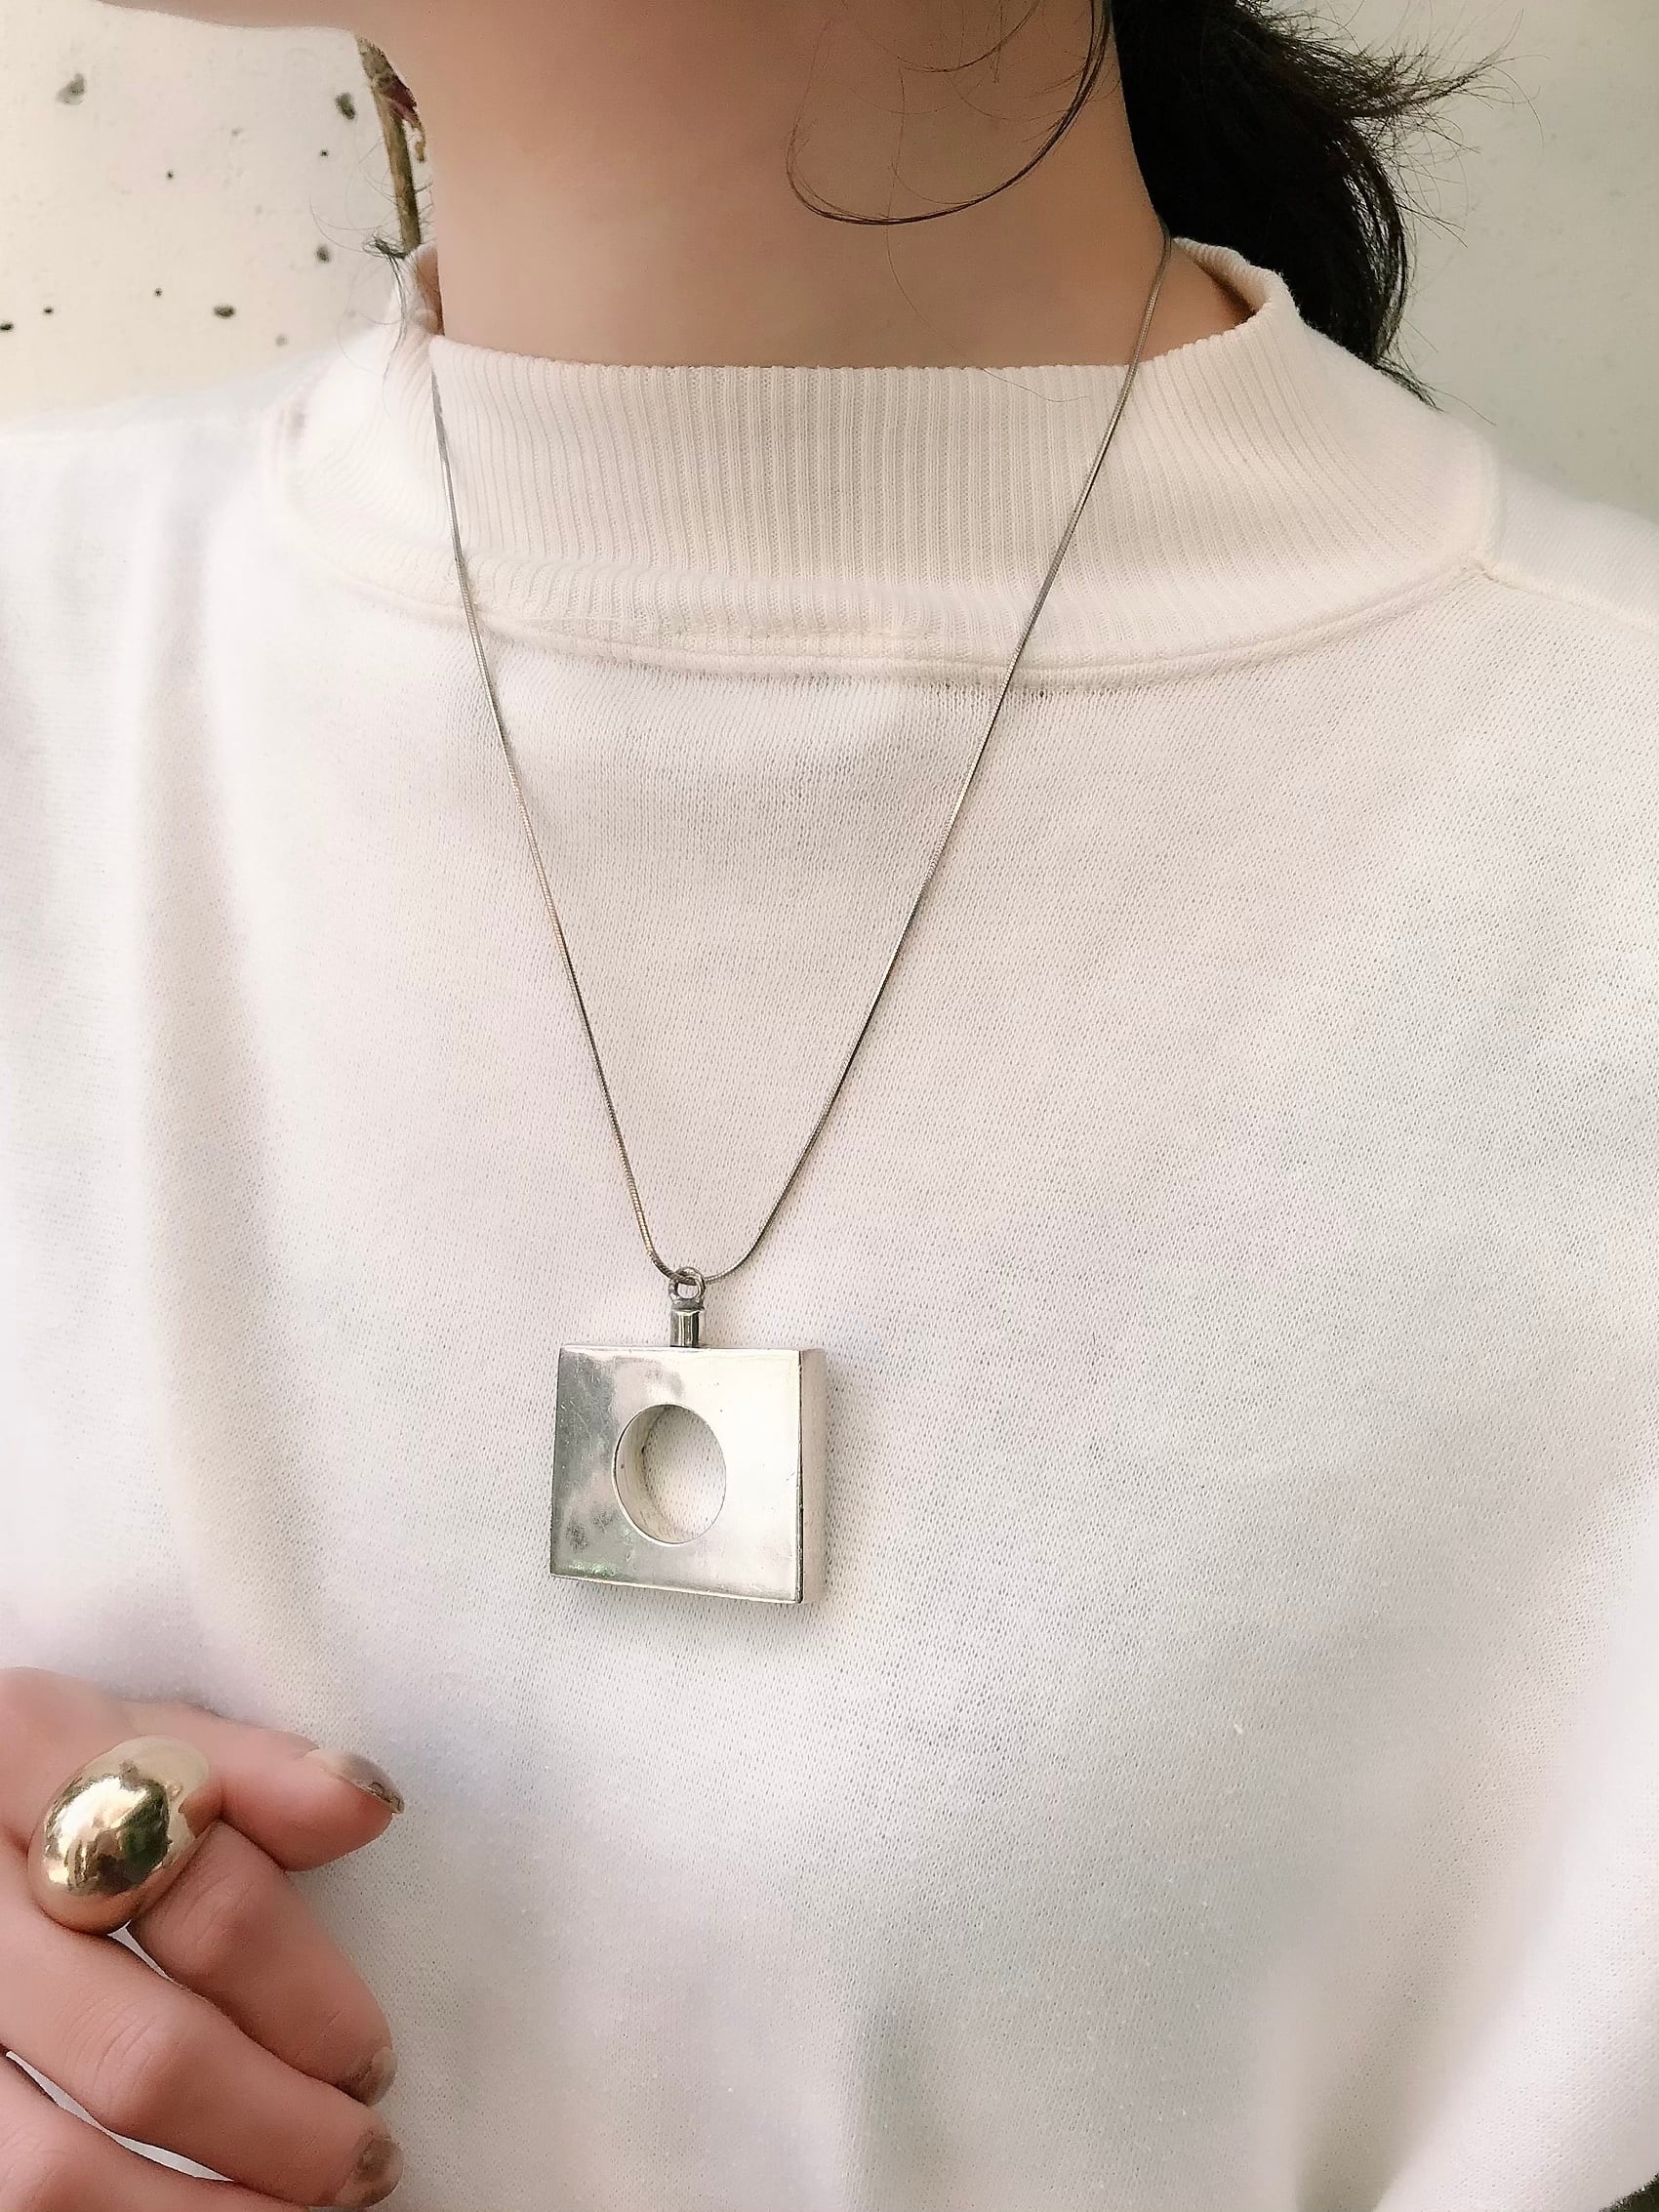 Mid-century 925 silver modern necklace ( ヴィンテージ シルバー 